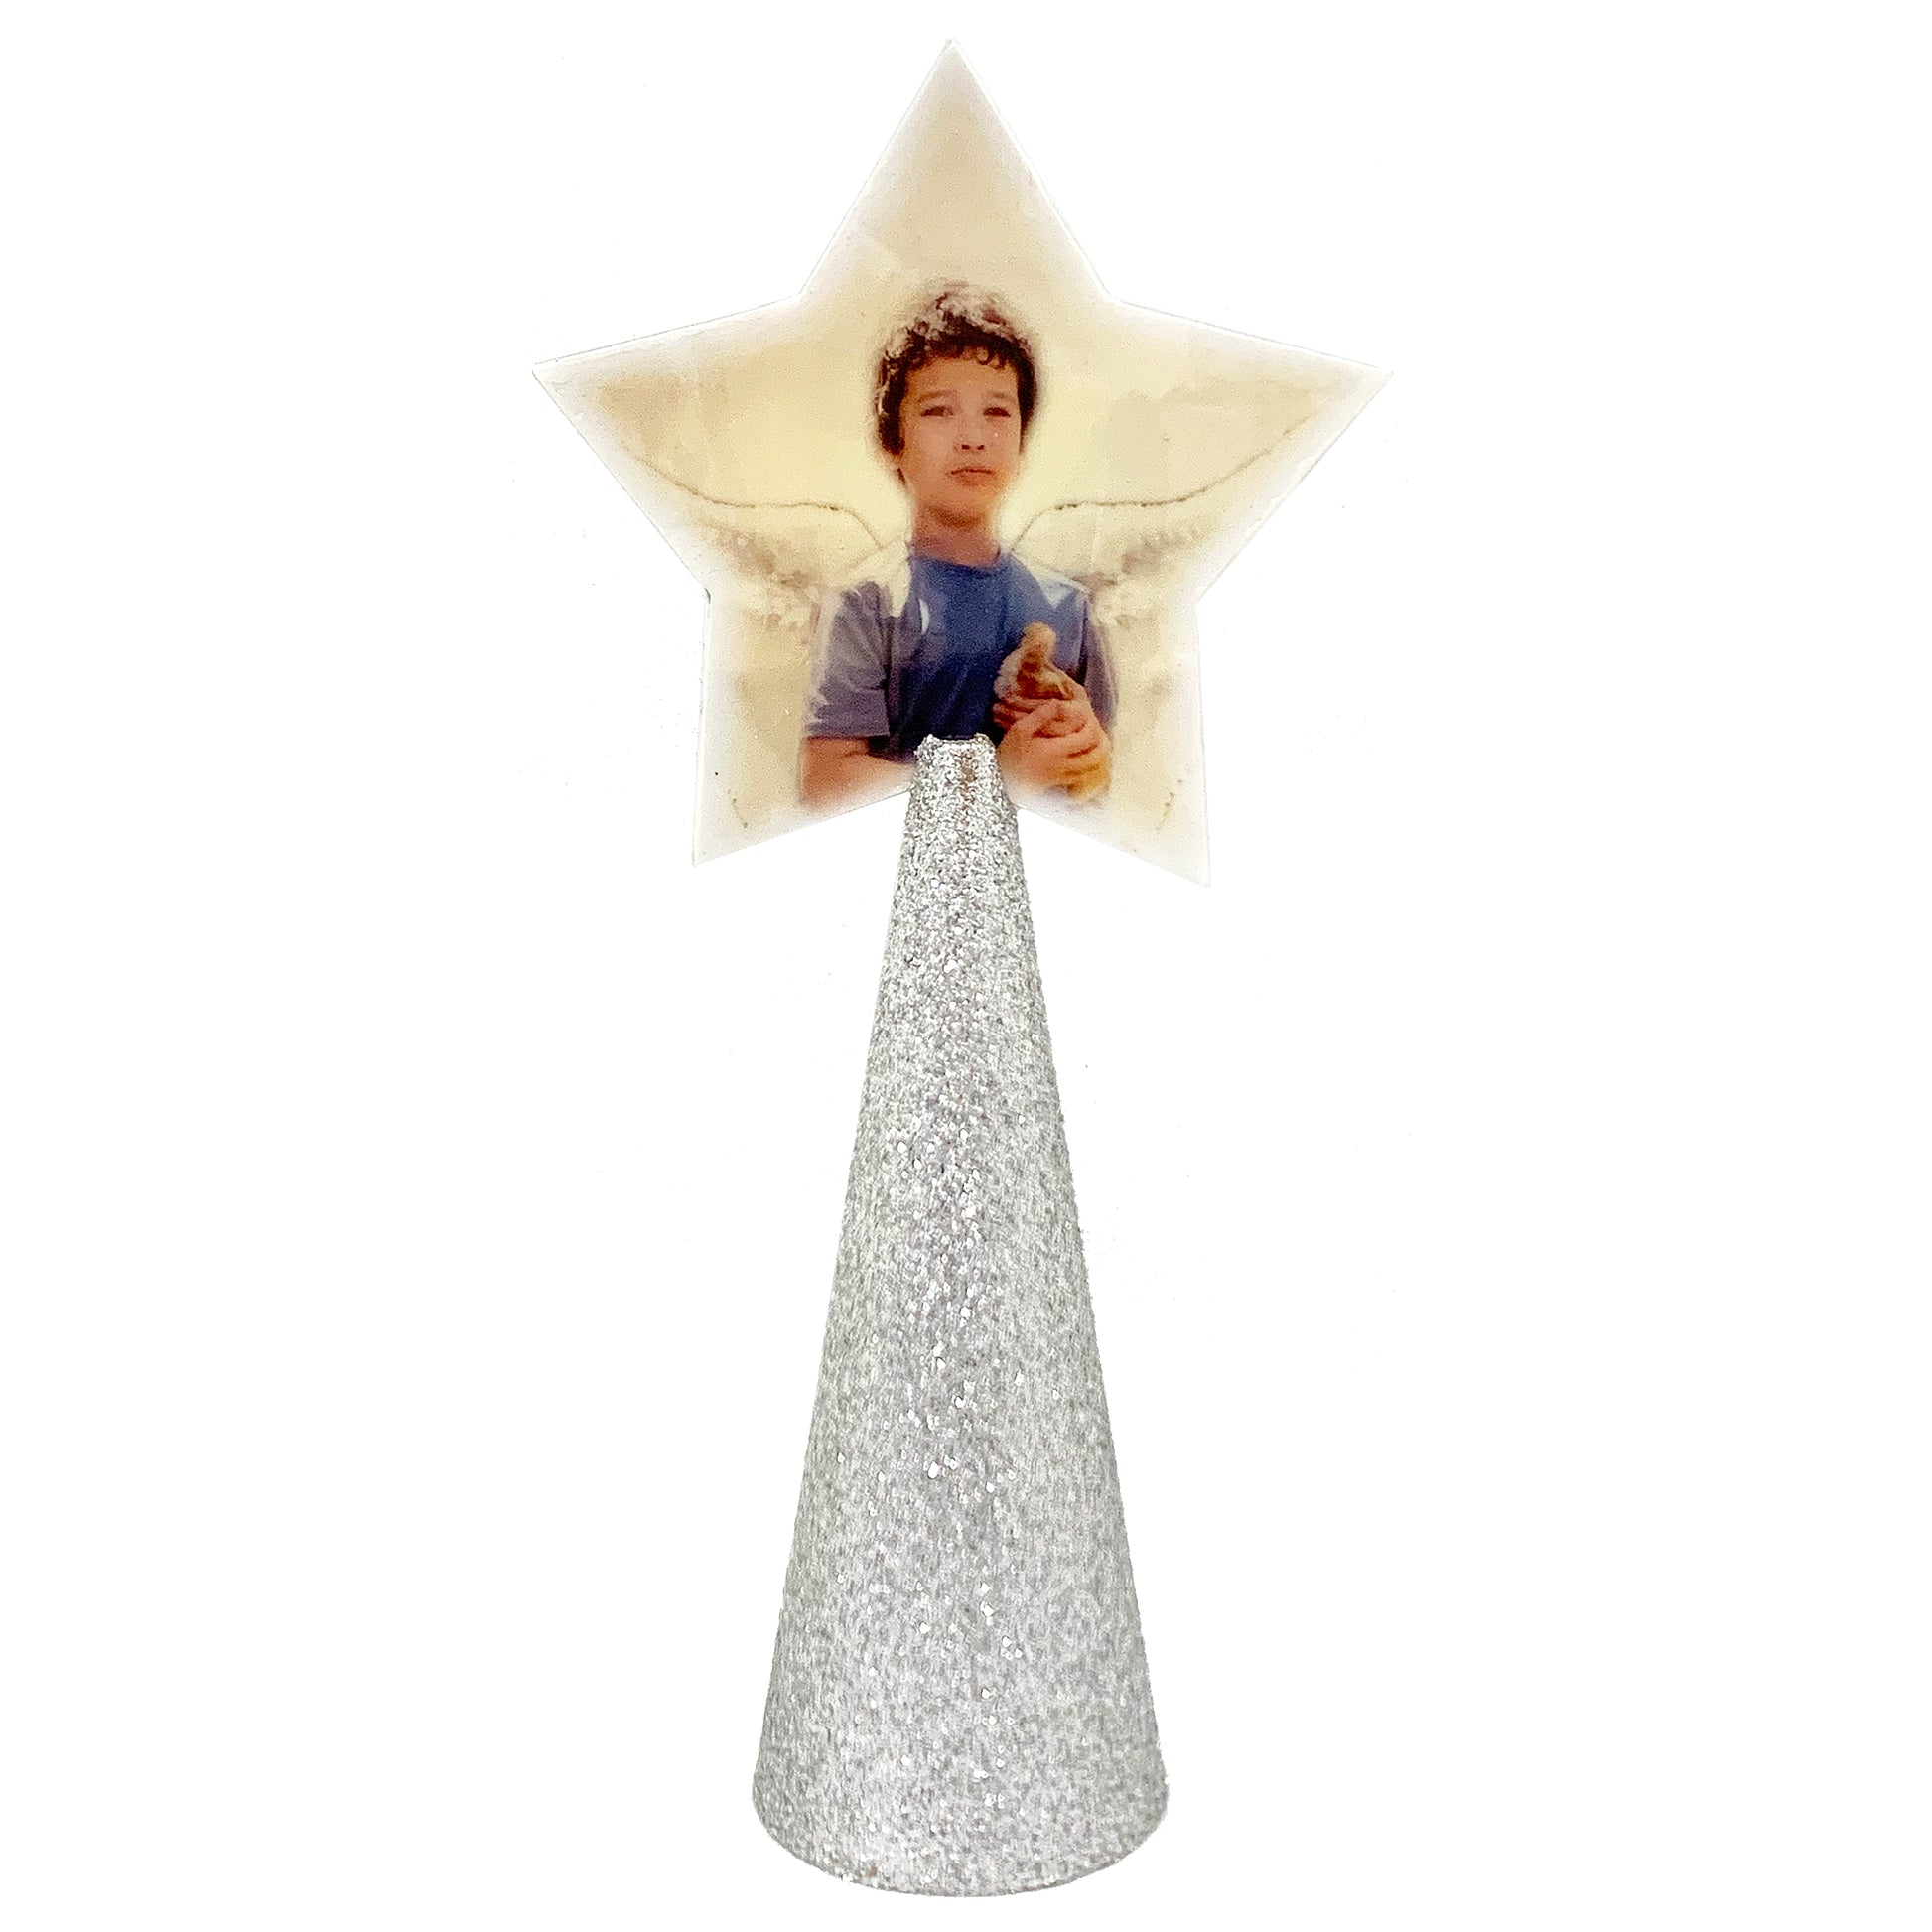 Custom tree topper - White Star with sample sweet boy photo - silver gold glitter cone